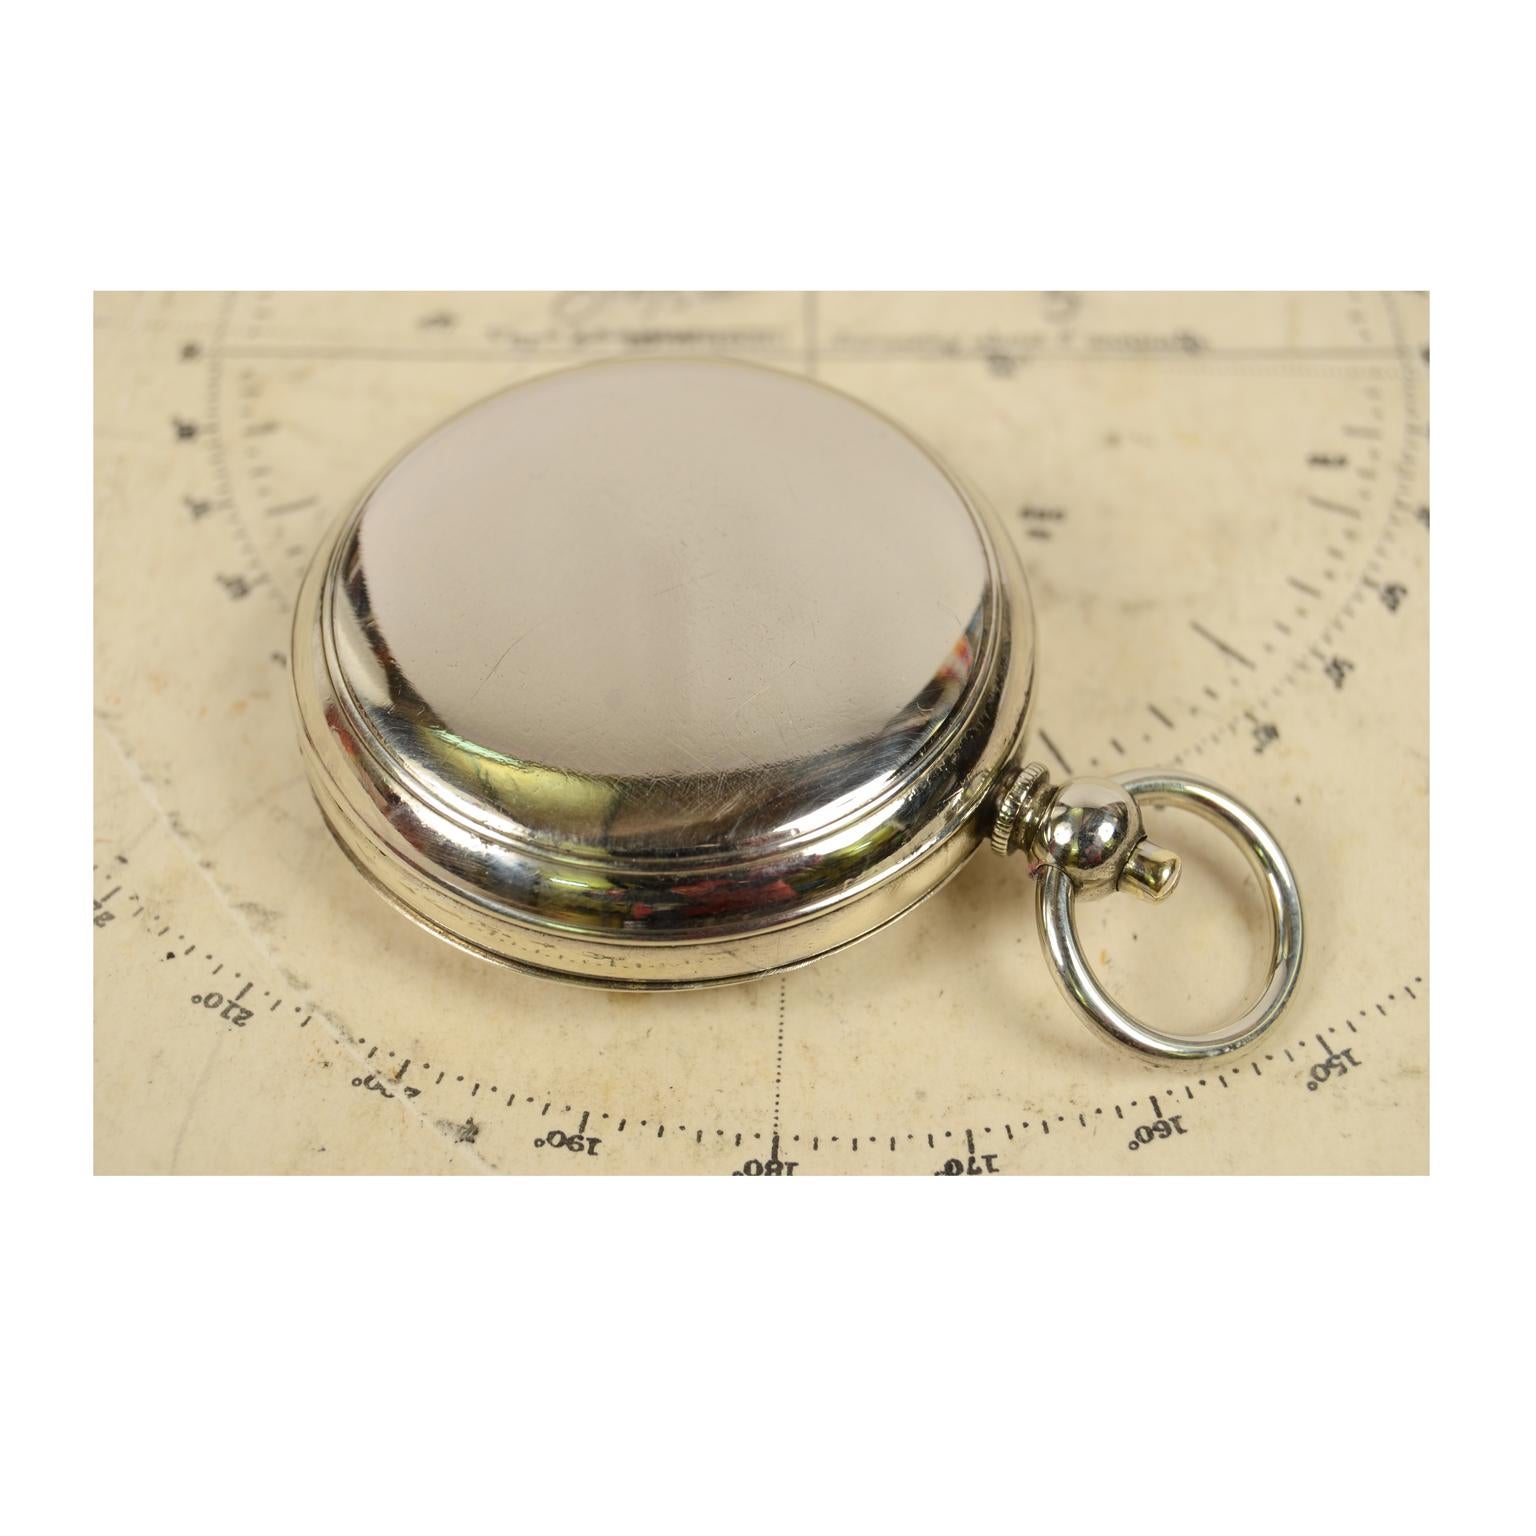 20th Century Pocket Compass for a British Officer, Early 1900s